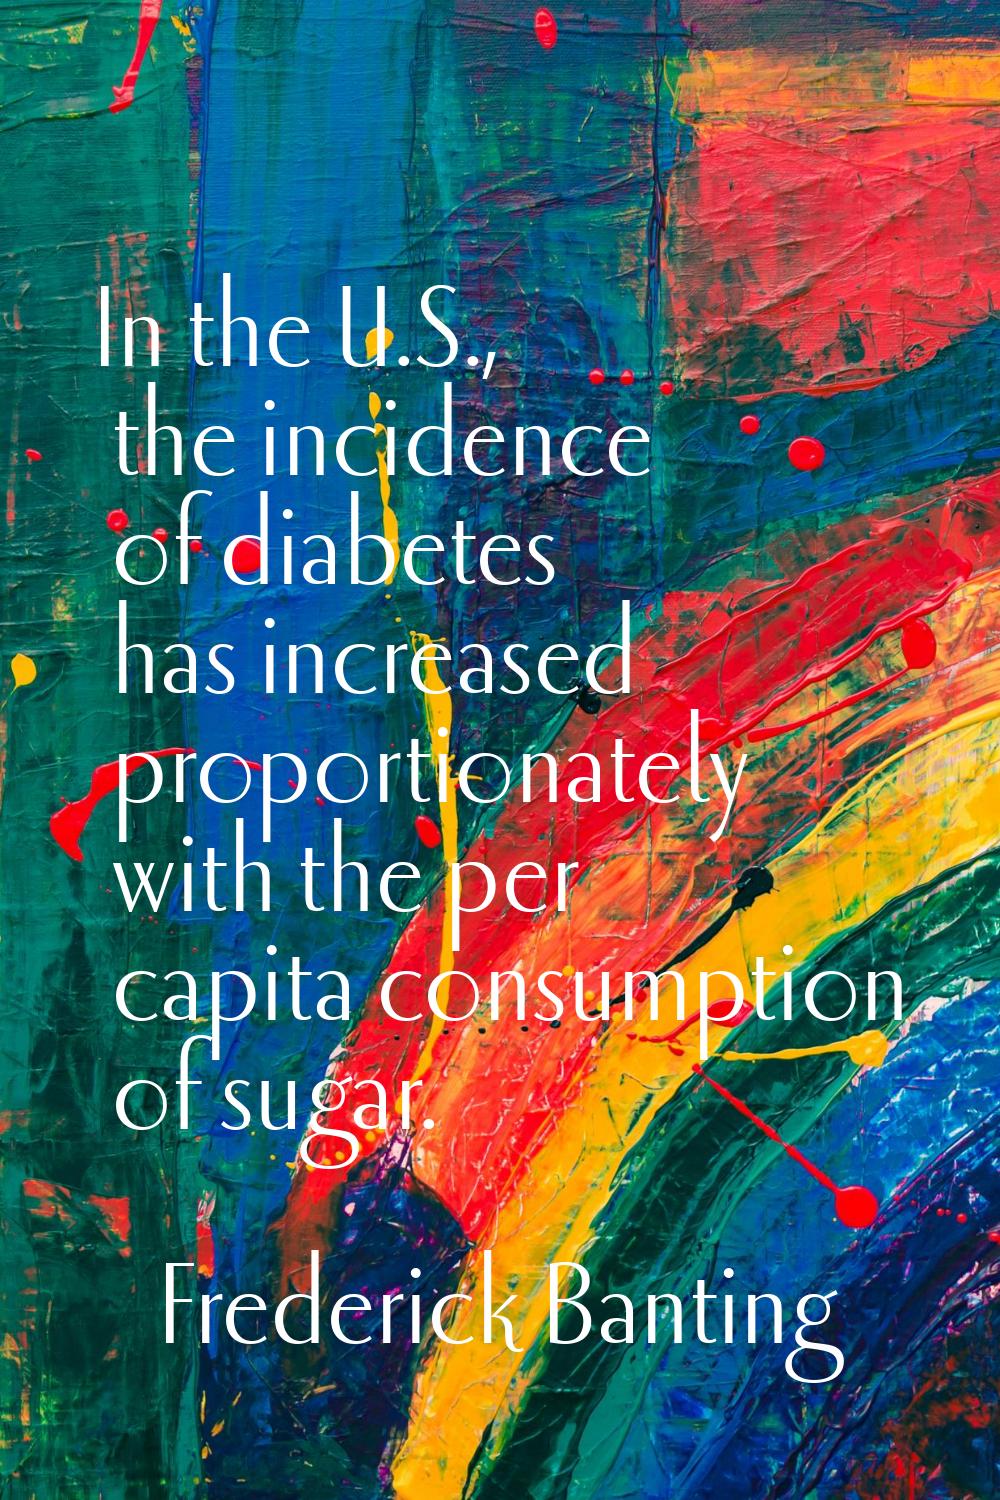 In the U.S., the incidence of diabetes has increased proportionately with the per capita consumptio